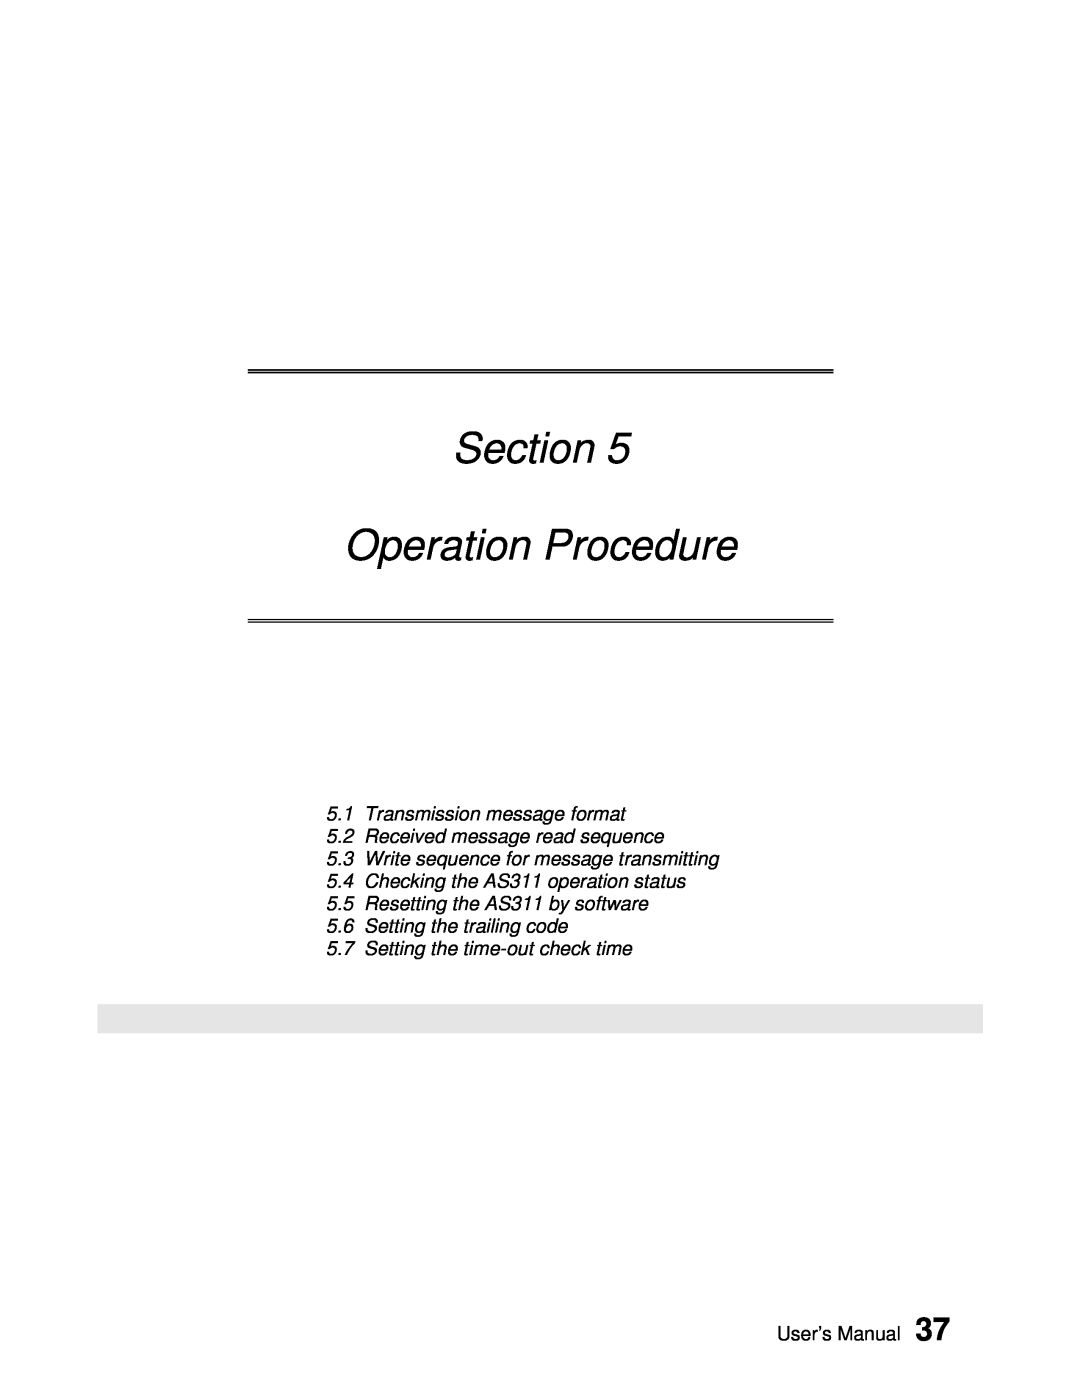 Toshiba AS311 user manual Section Operation Procedure, Transmission message format 5.2 Received message read sequence 